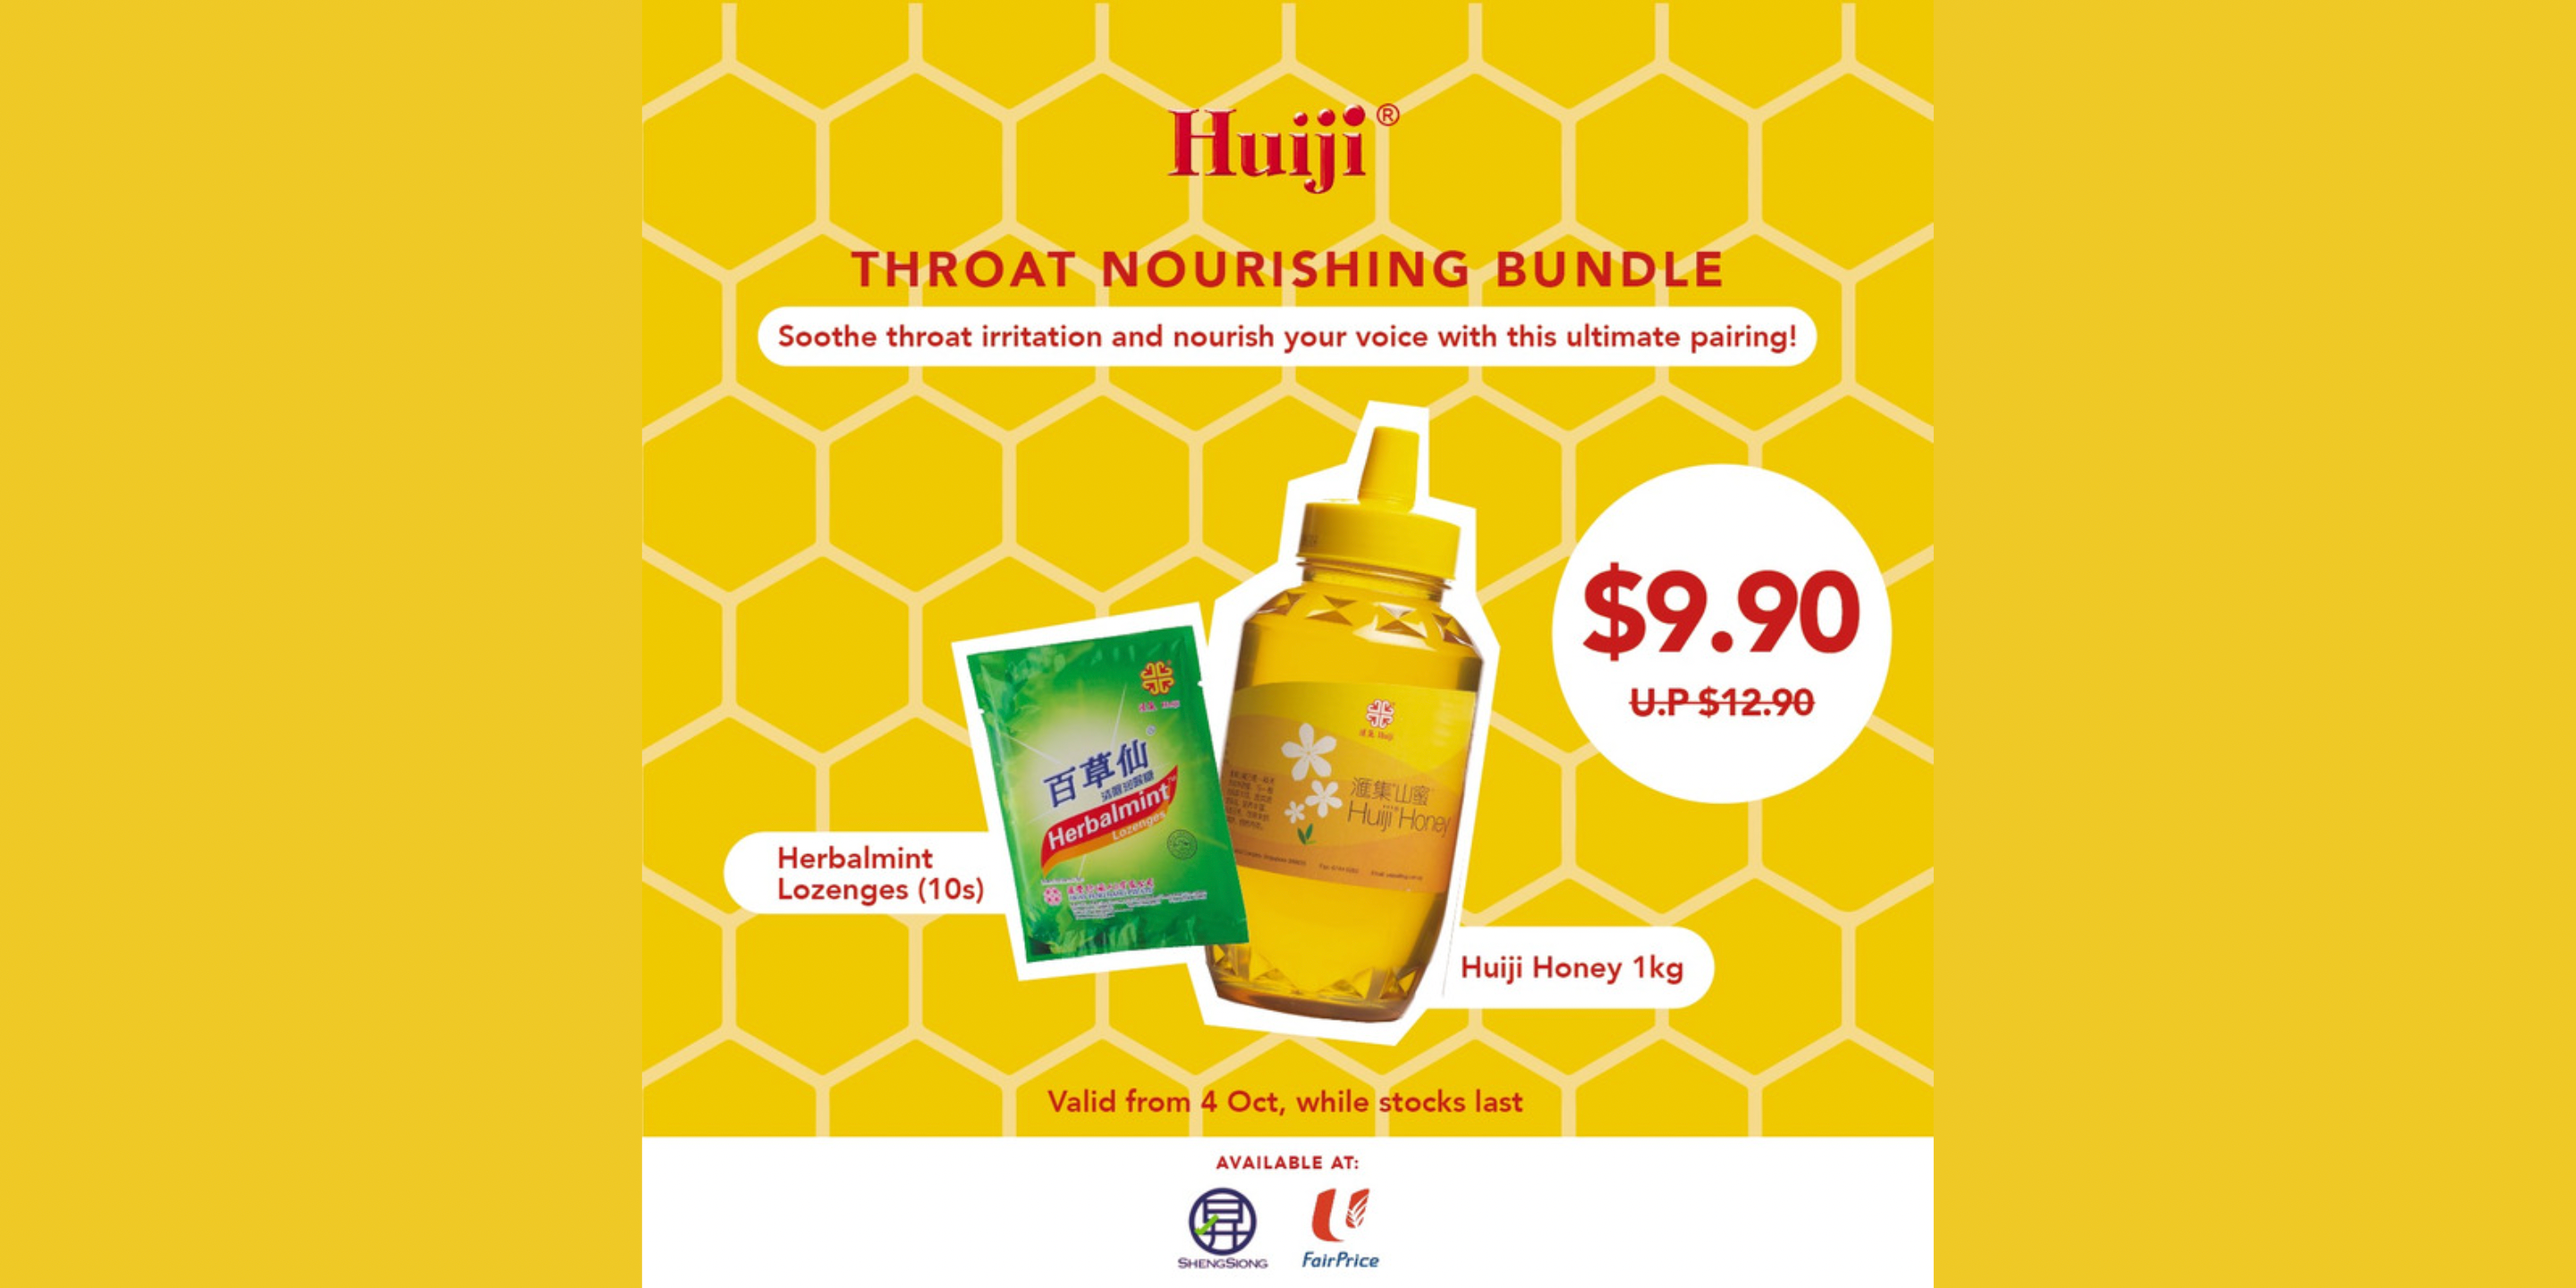 Strengthen your immune system & soothe throat irritation with Huiji